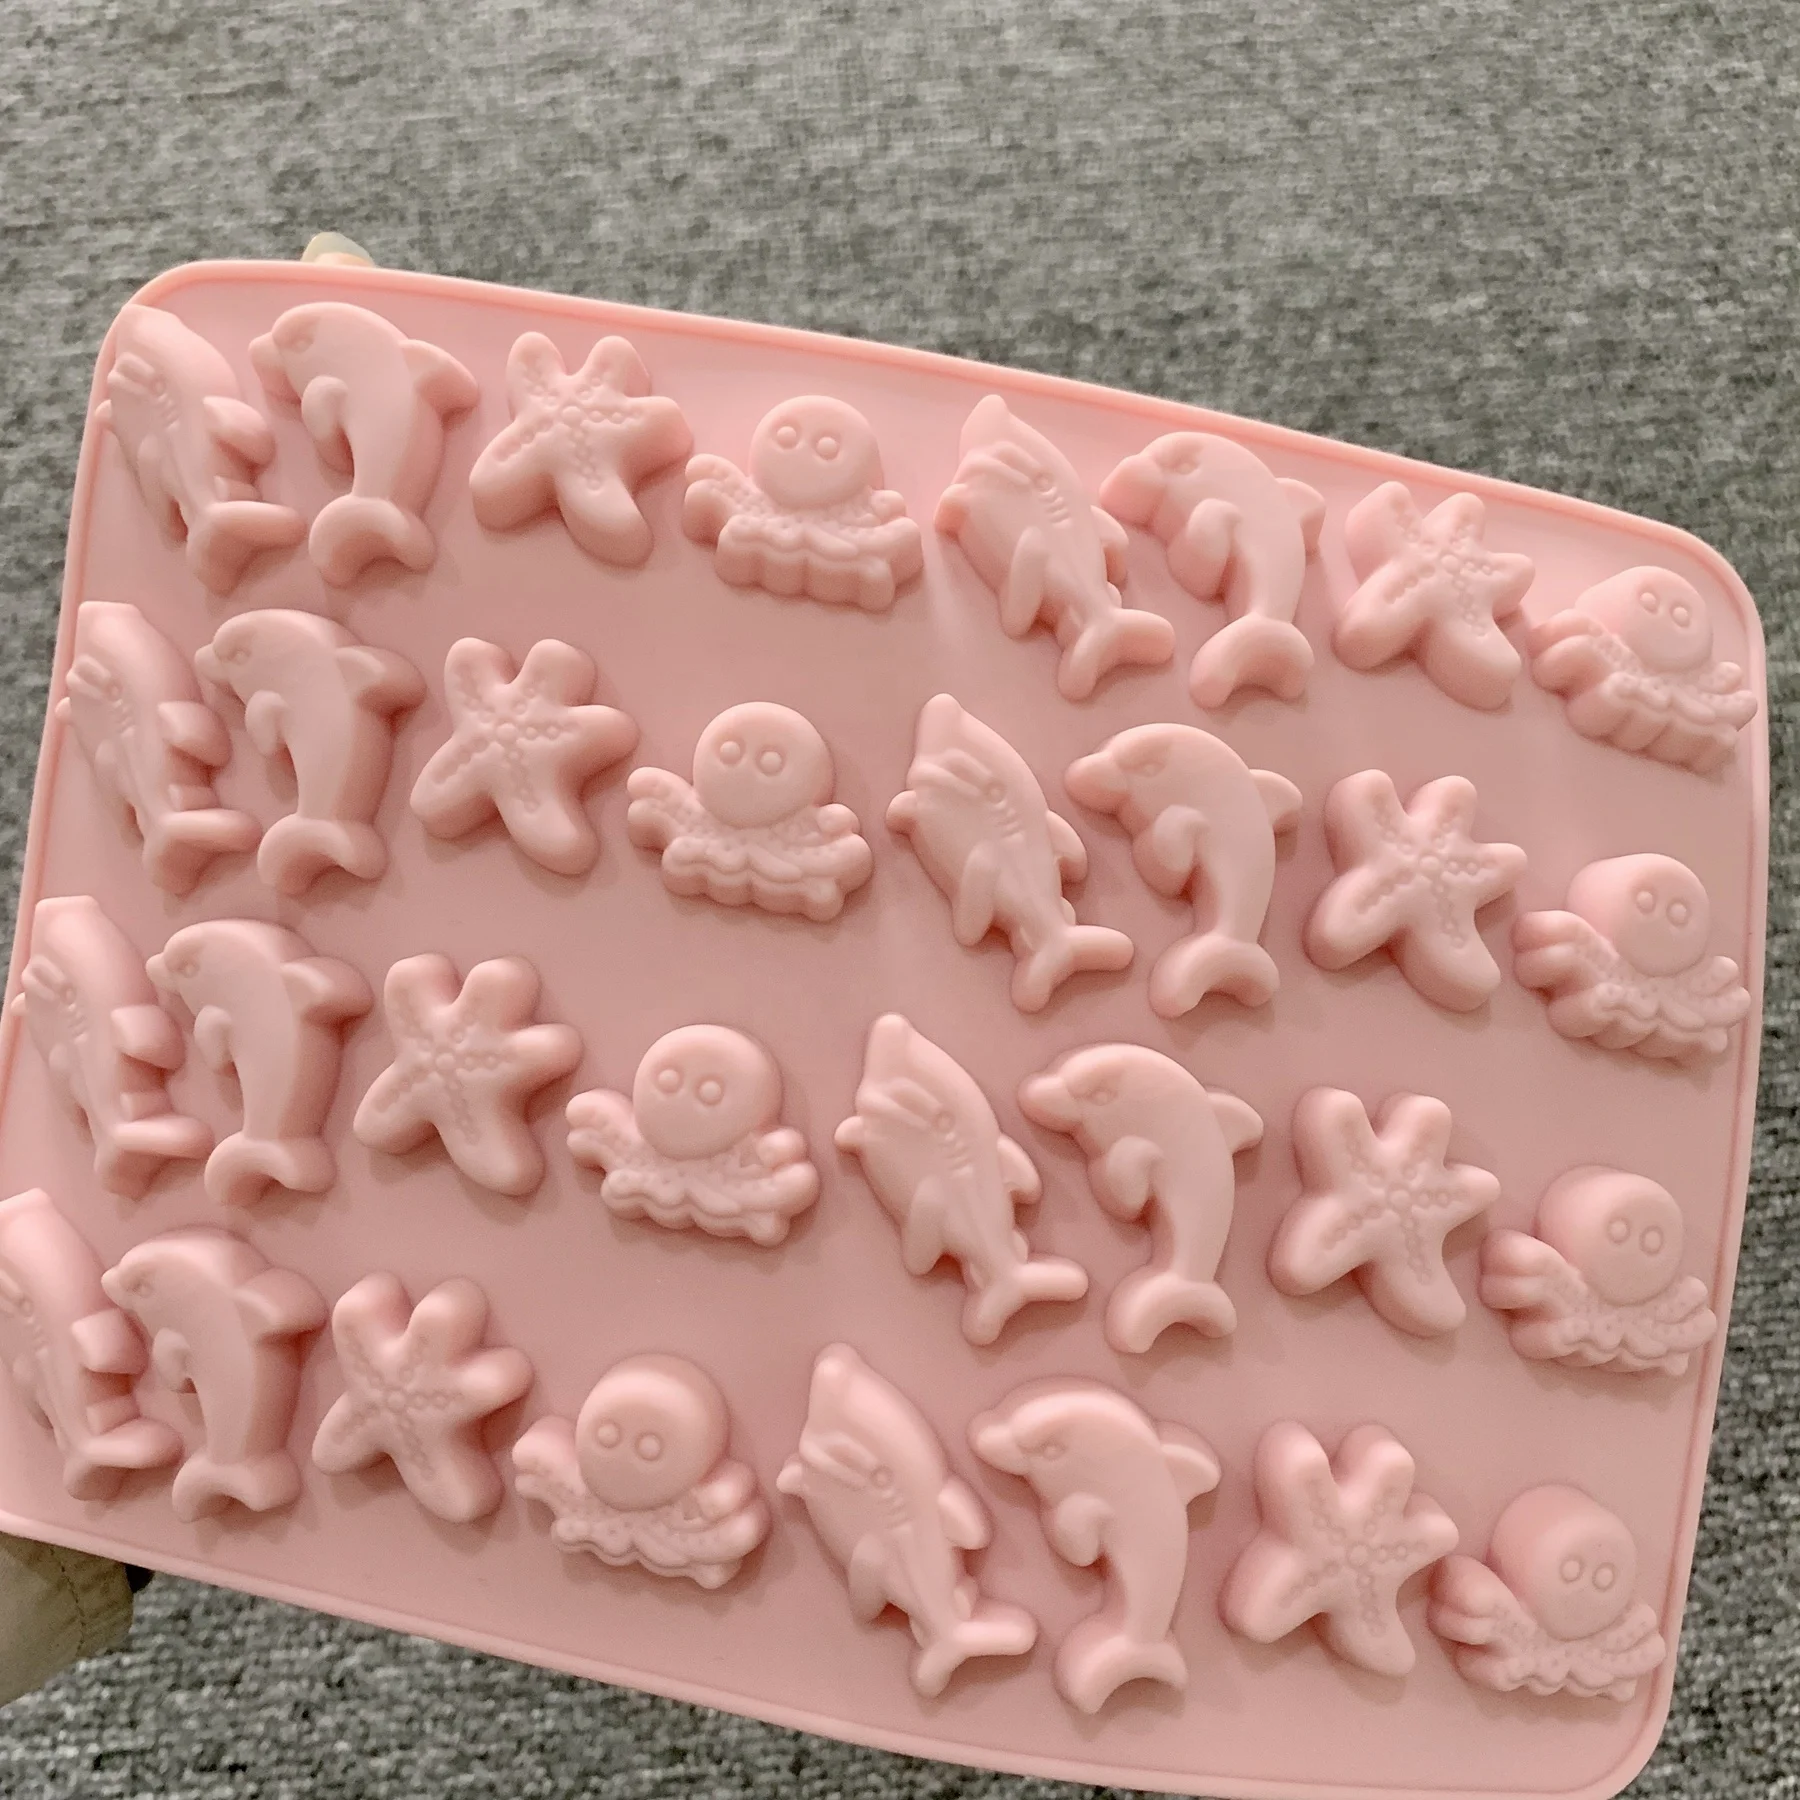 

DIY QQ Silicone Soft Candy Mould Ice Cube Tray Cake Candy Jelly Mould Silicone Gummy Chocolate Cookie Baking Mold Cartoon mold, Blue,pink